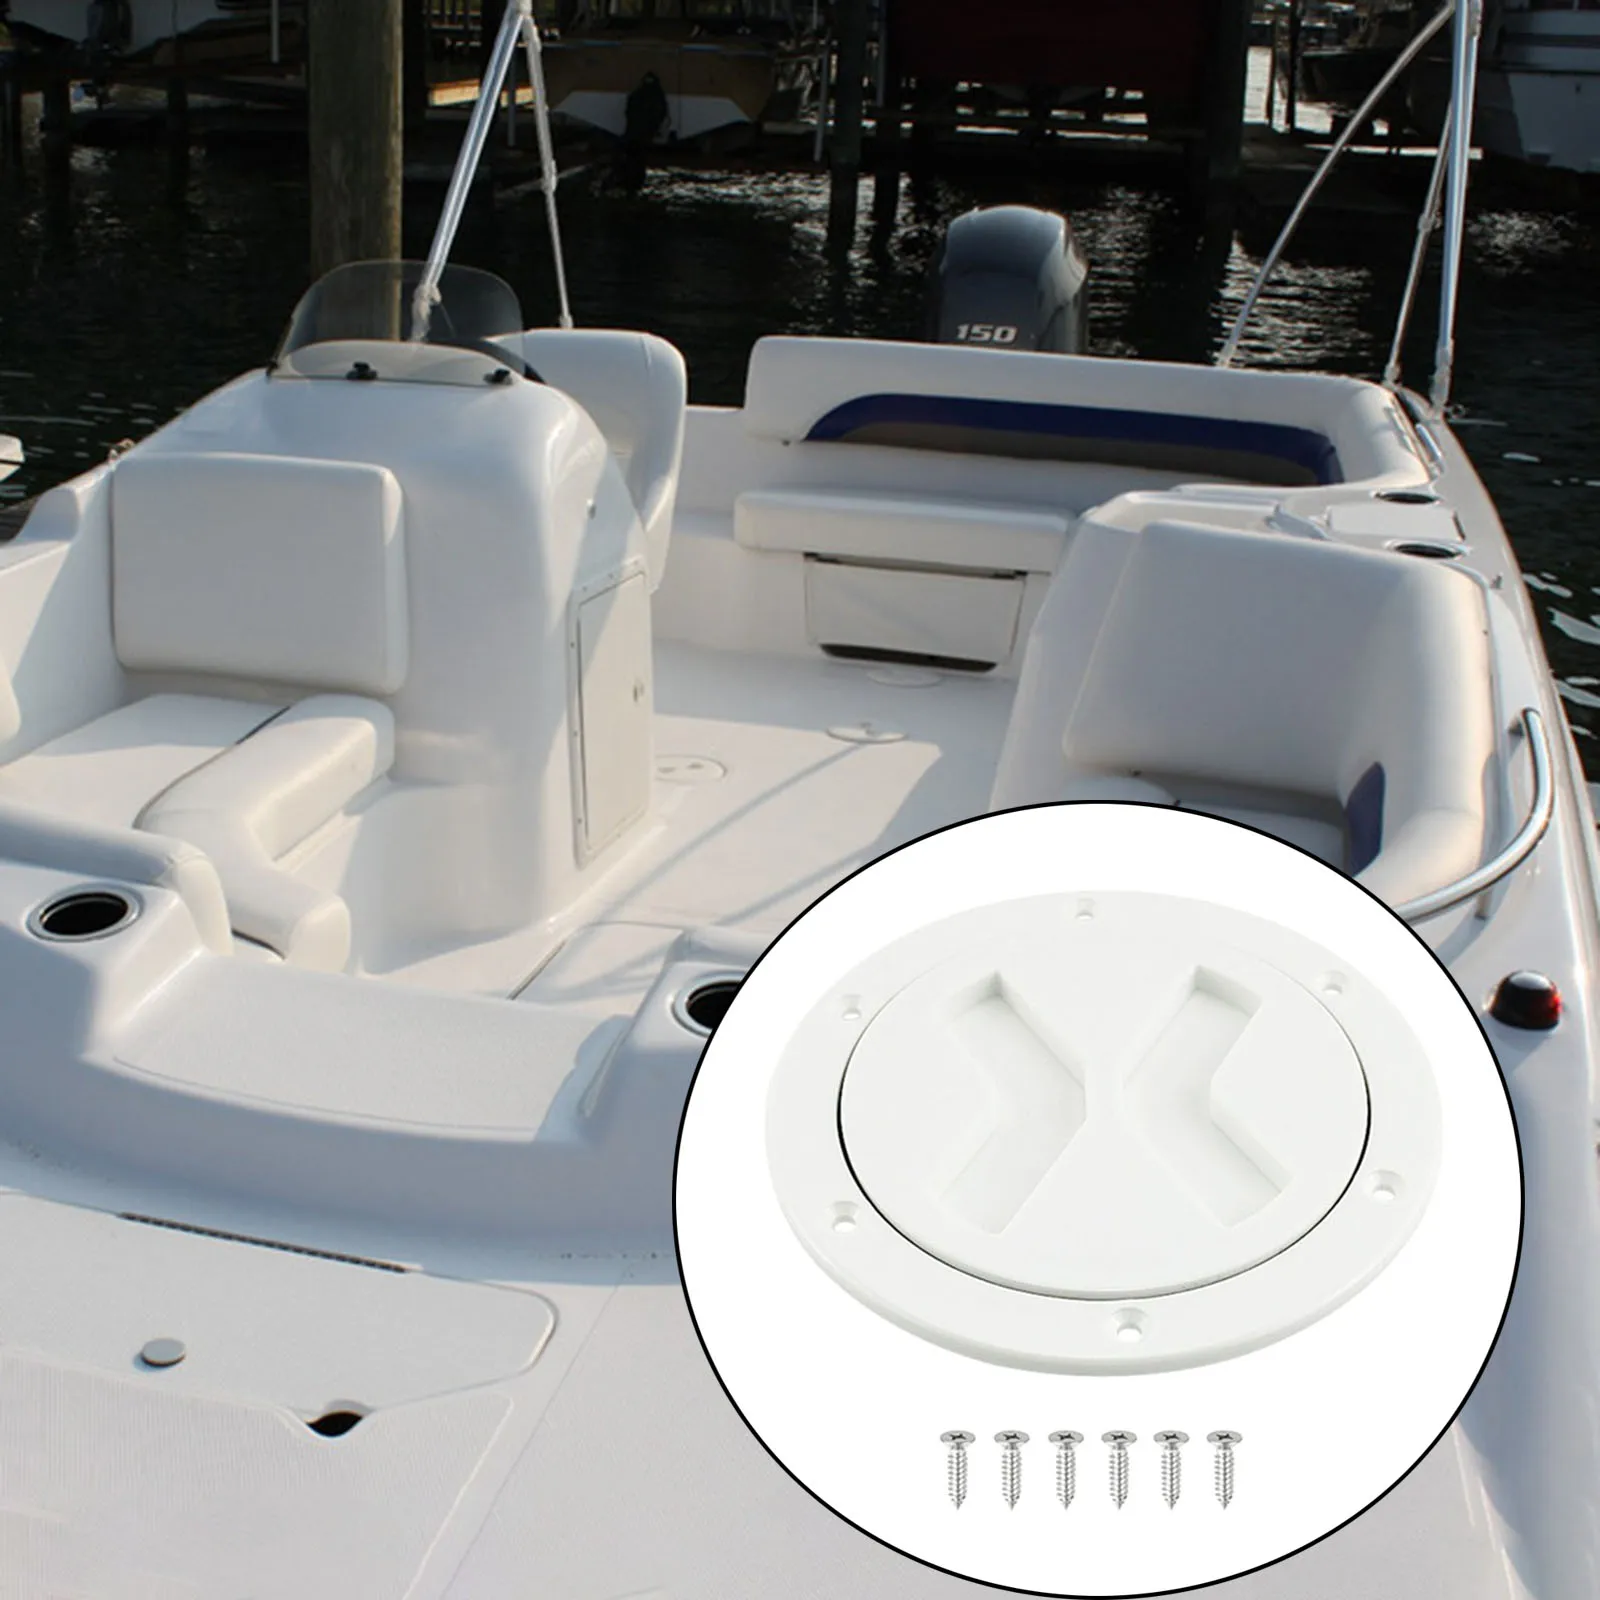 Boat 4 inch Access Port Hatch Cover Deck Plate Anti Aging Twist Out ABS Plastic Water Tight Lid for Marine